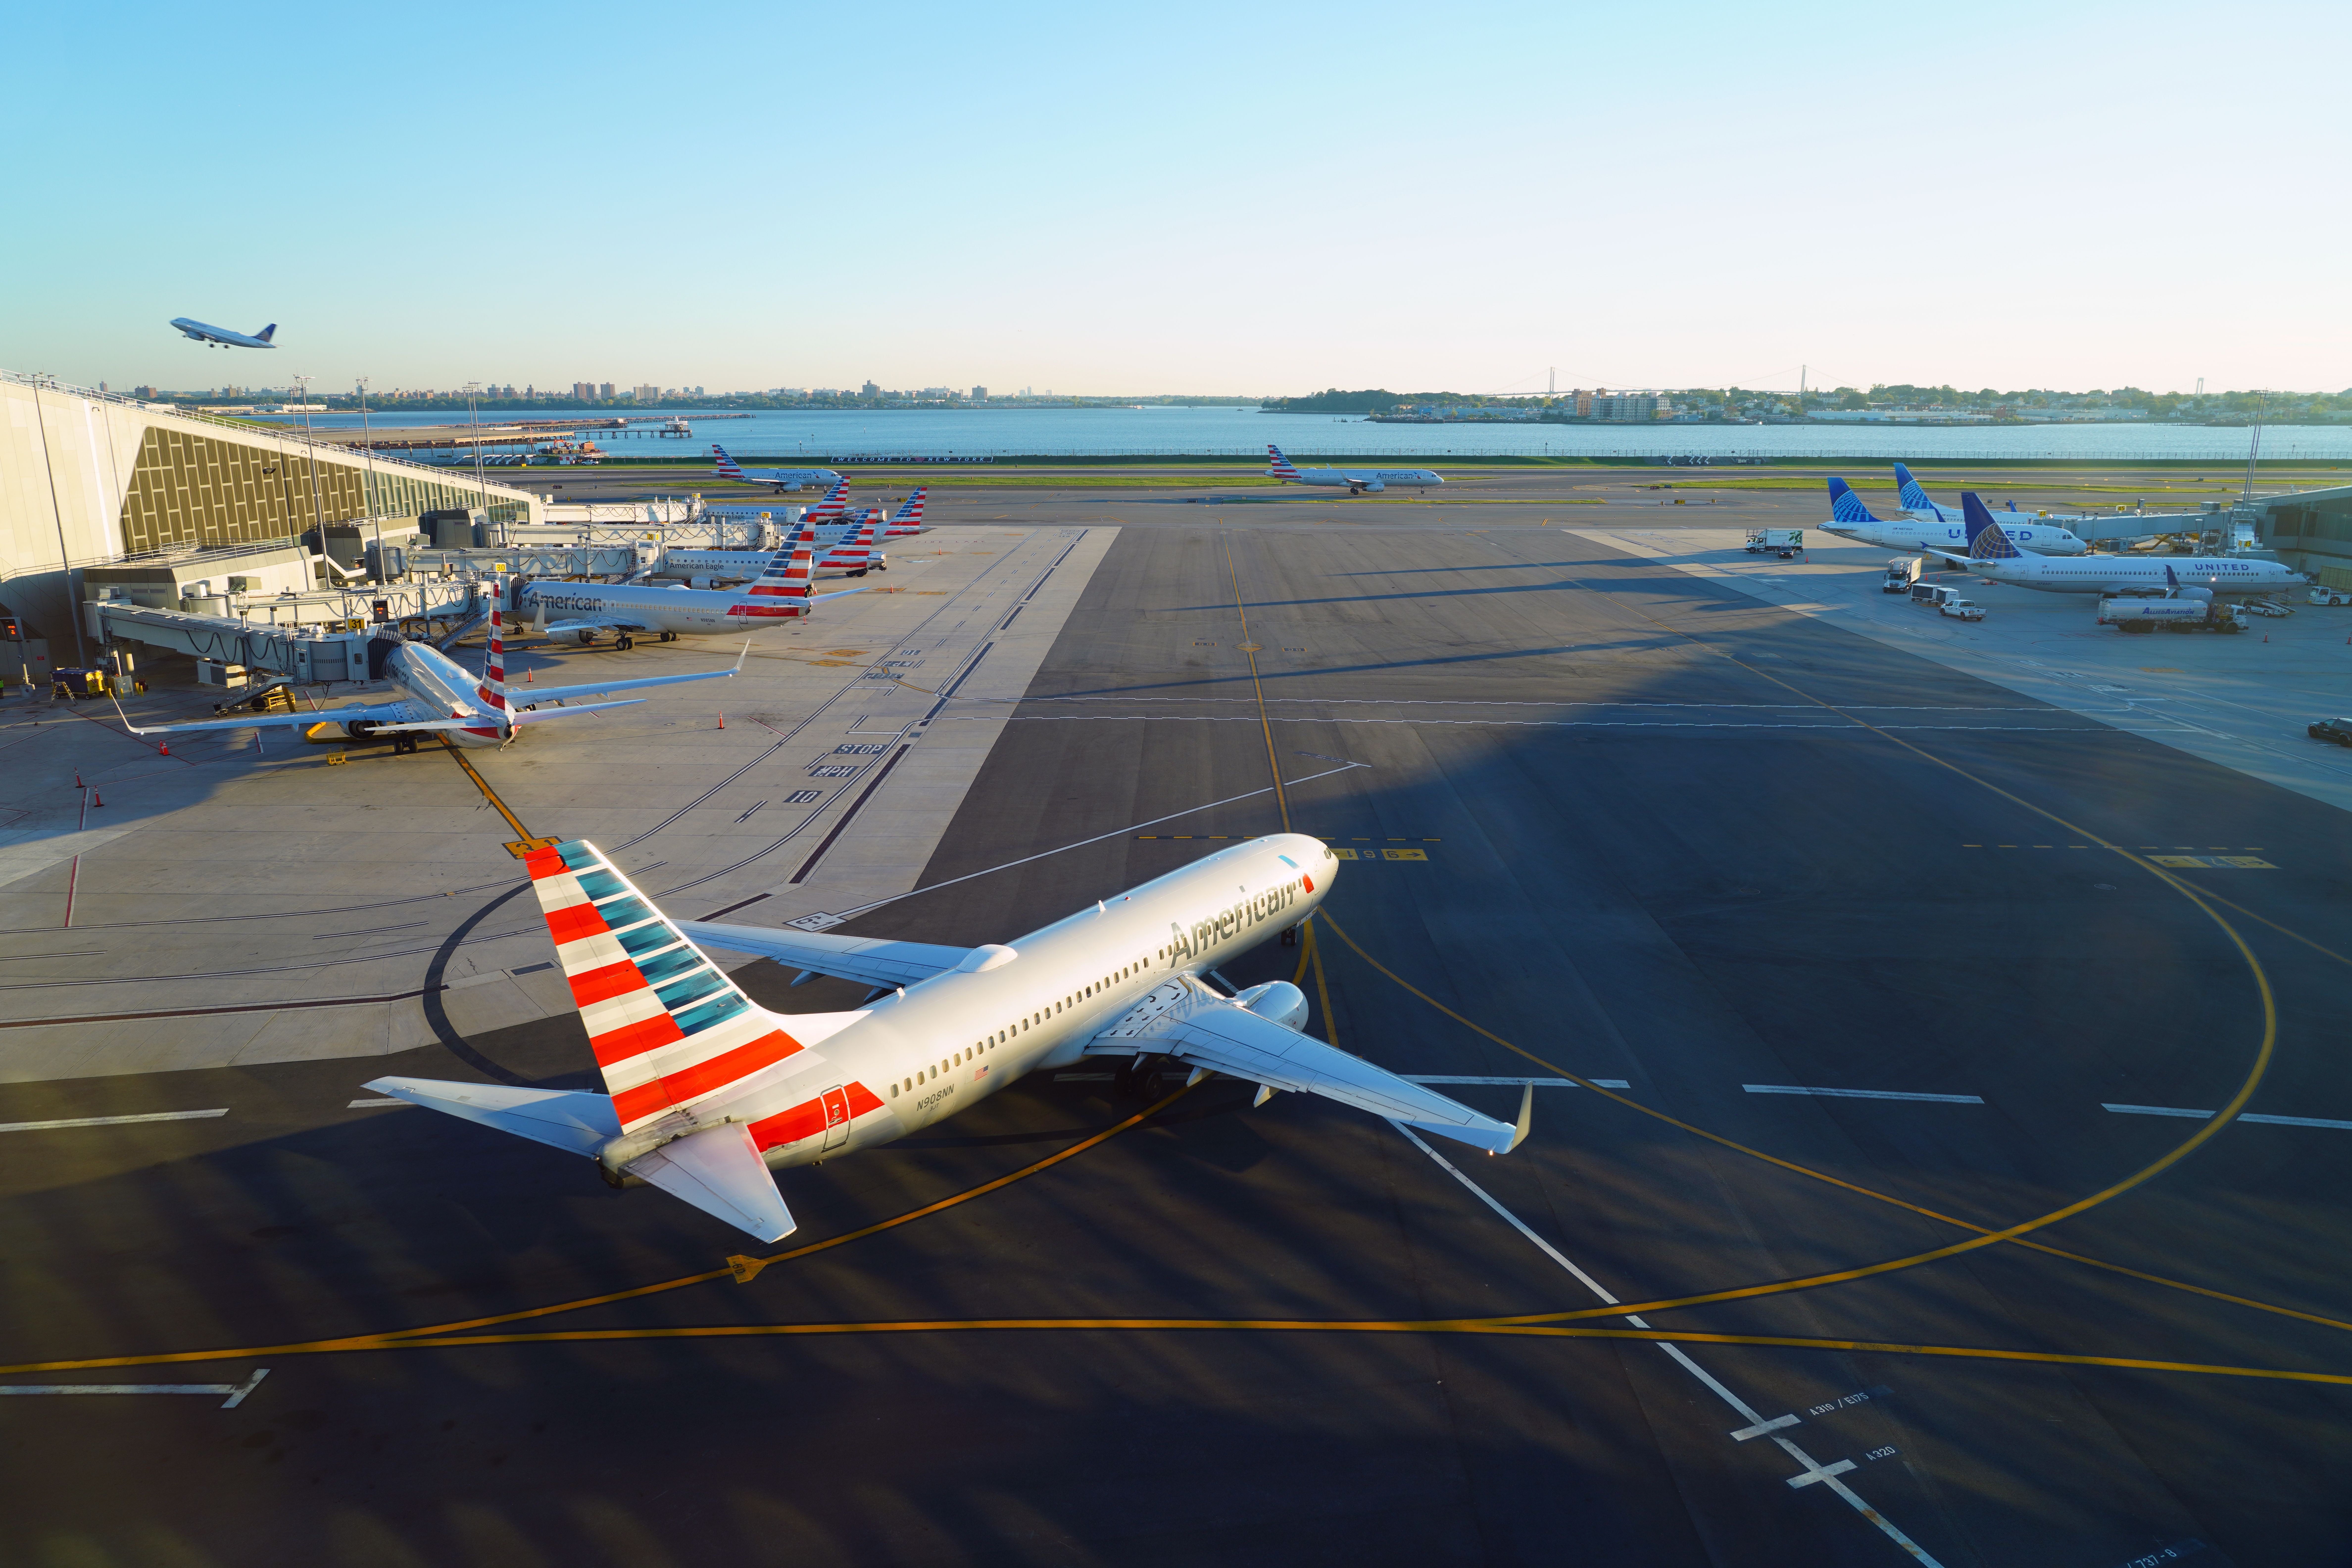 An American Airlines Aircraft on the apron at New York LaGuardia Airport.